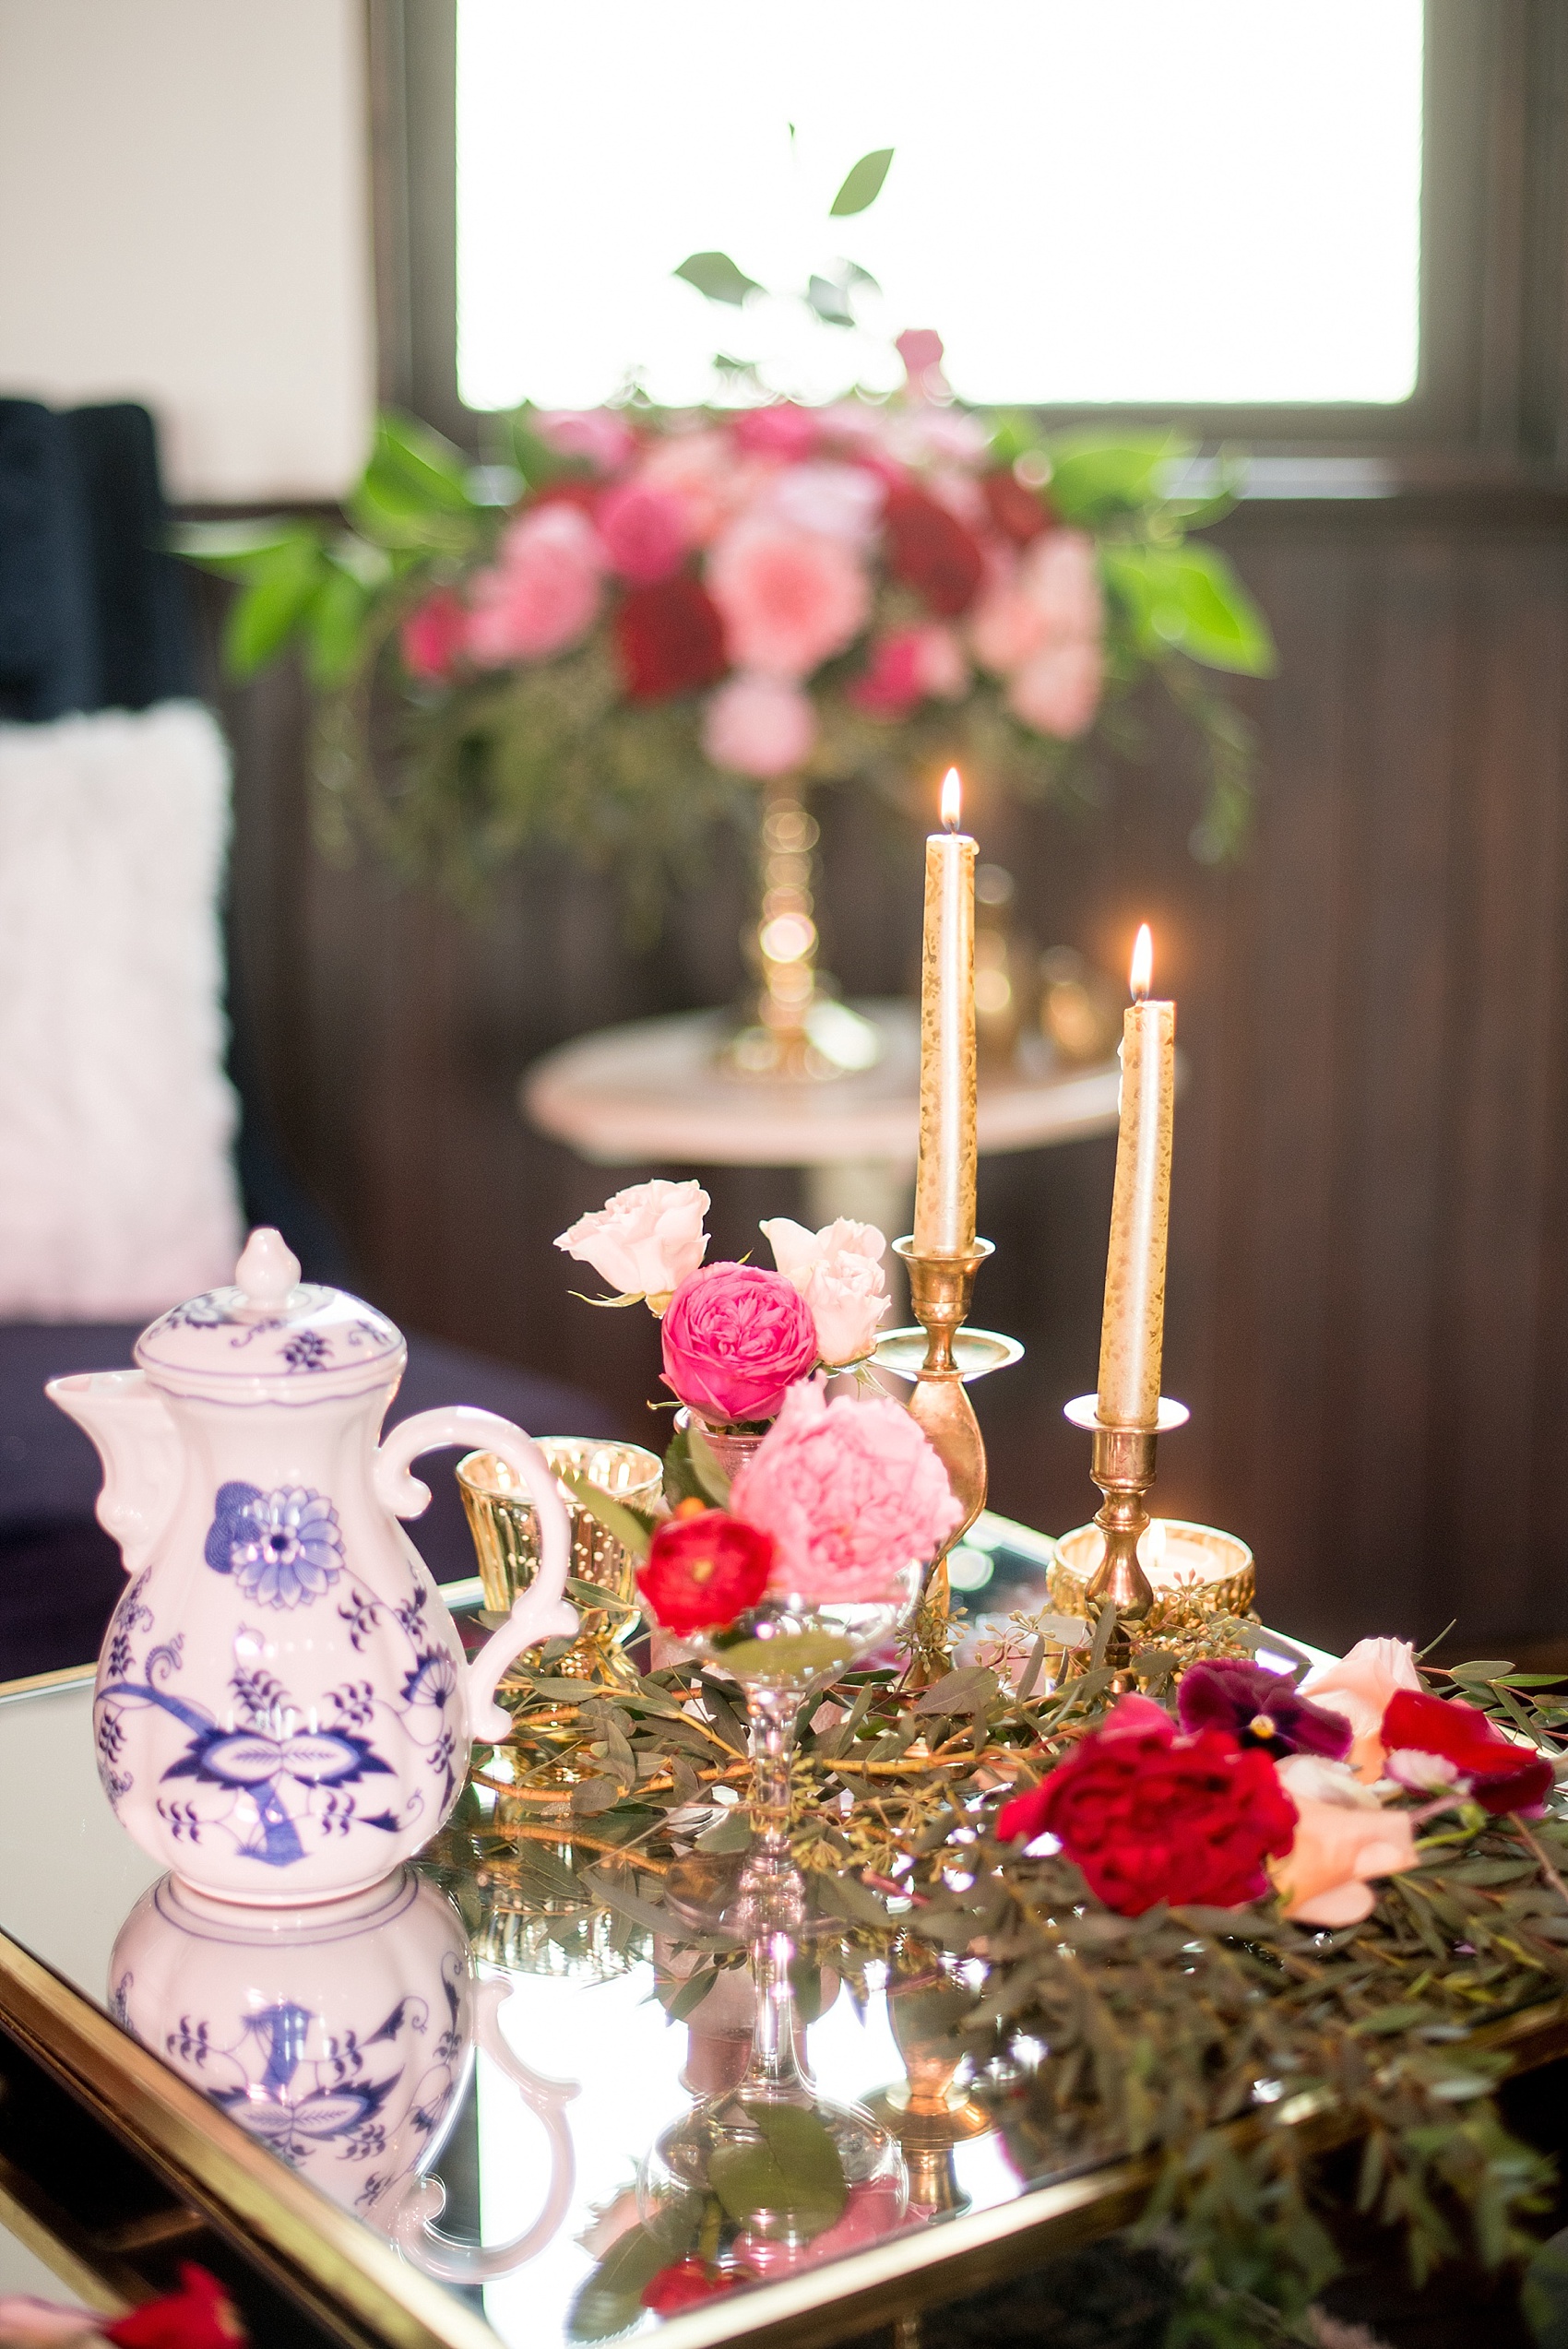 All Saints Chapel Raleigh bridal photos with an inspirational tea for Galentine's Day.